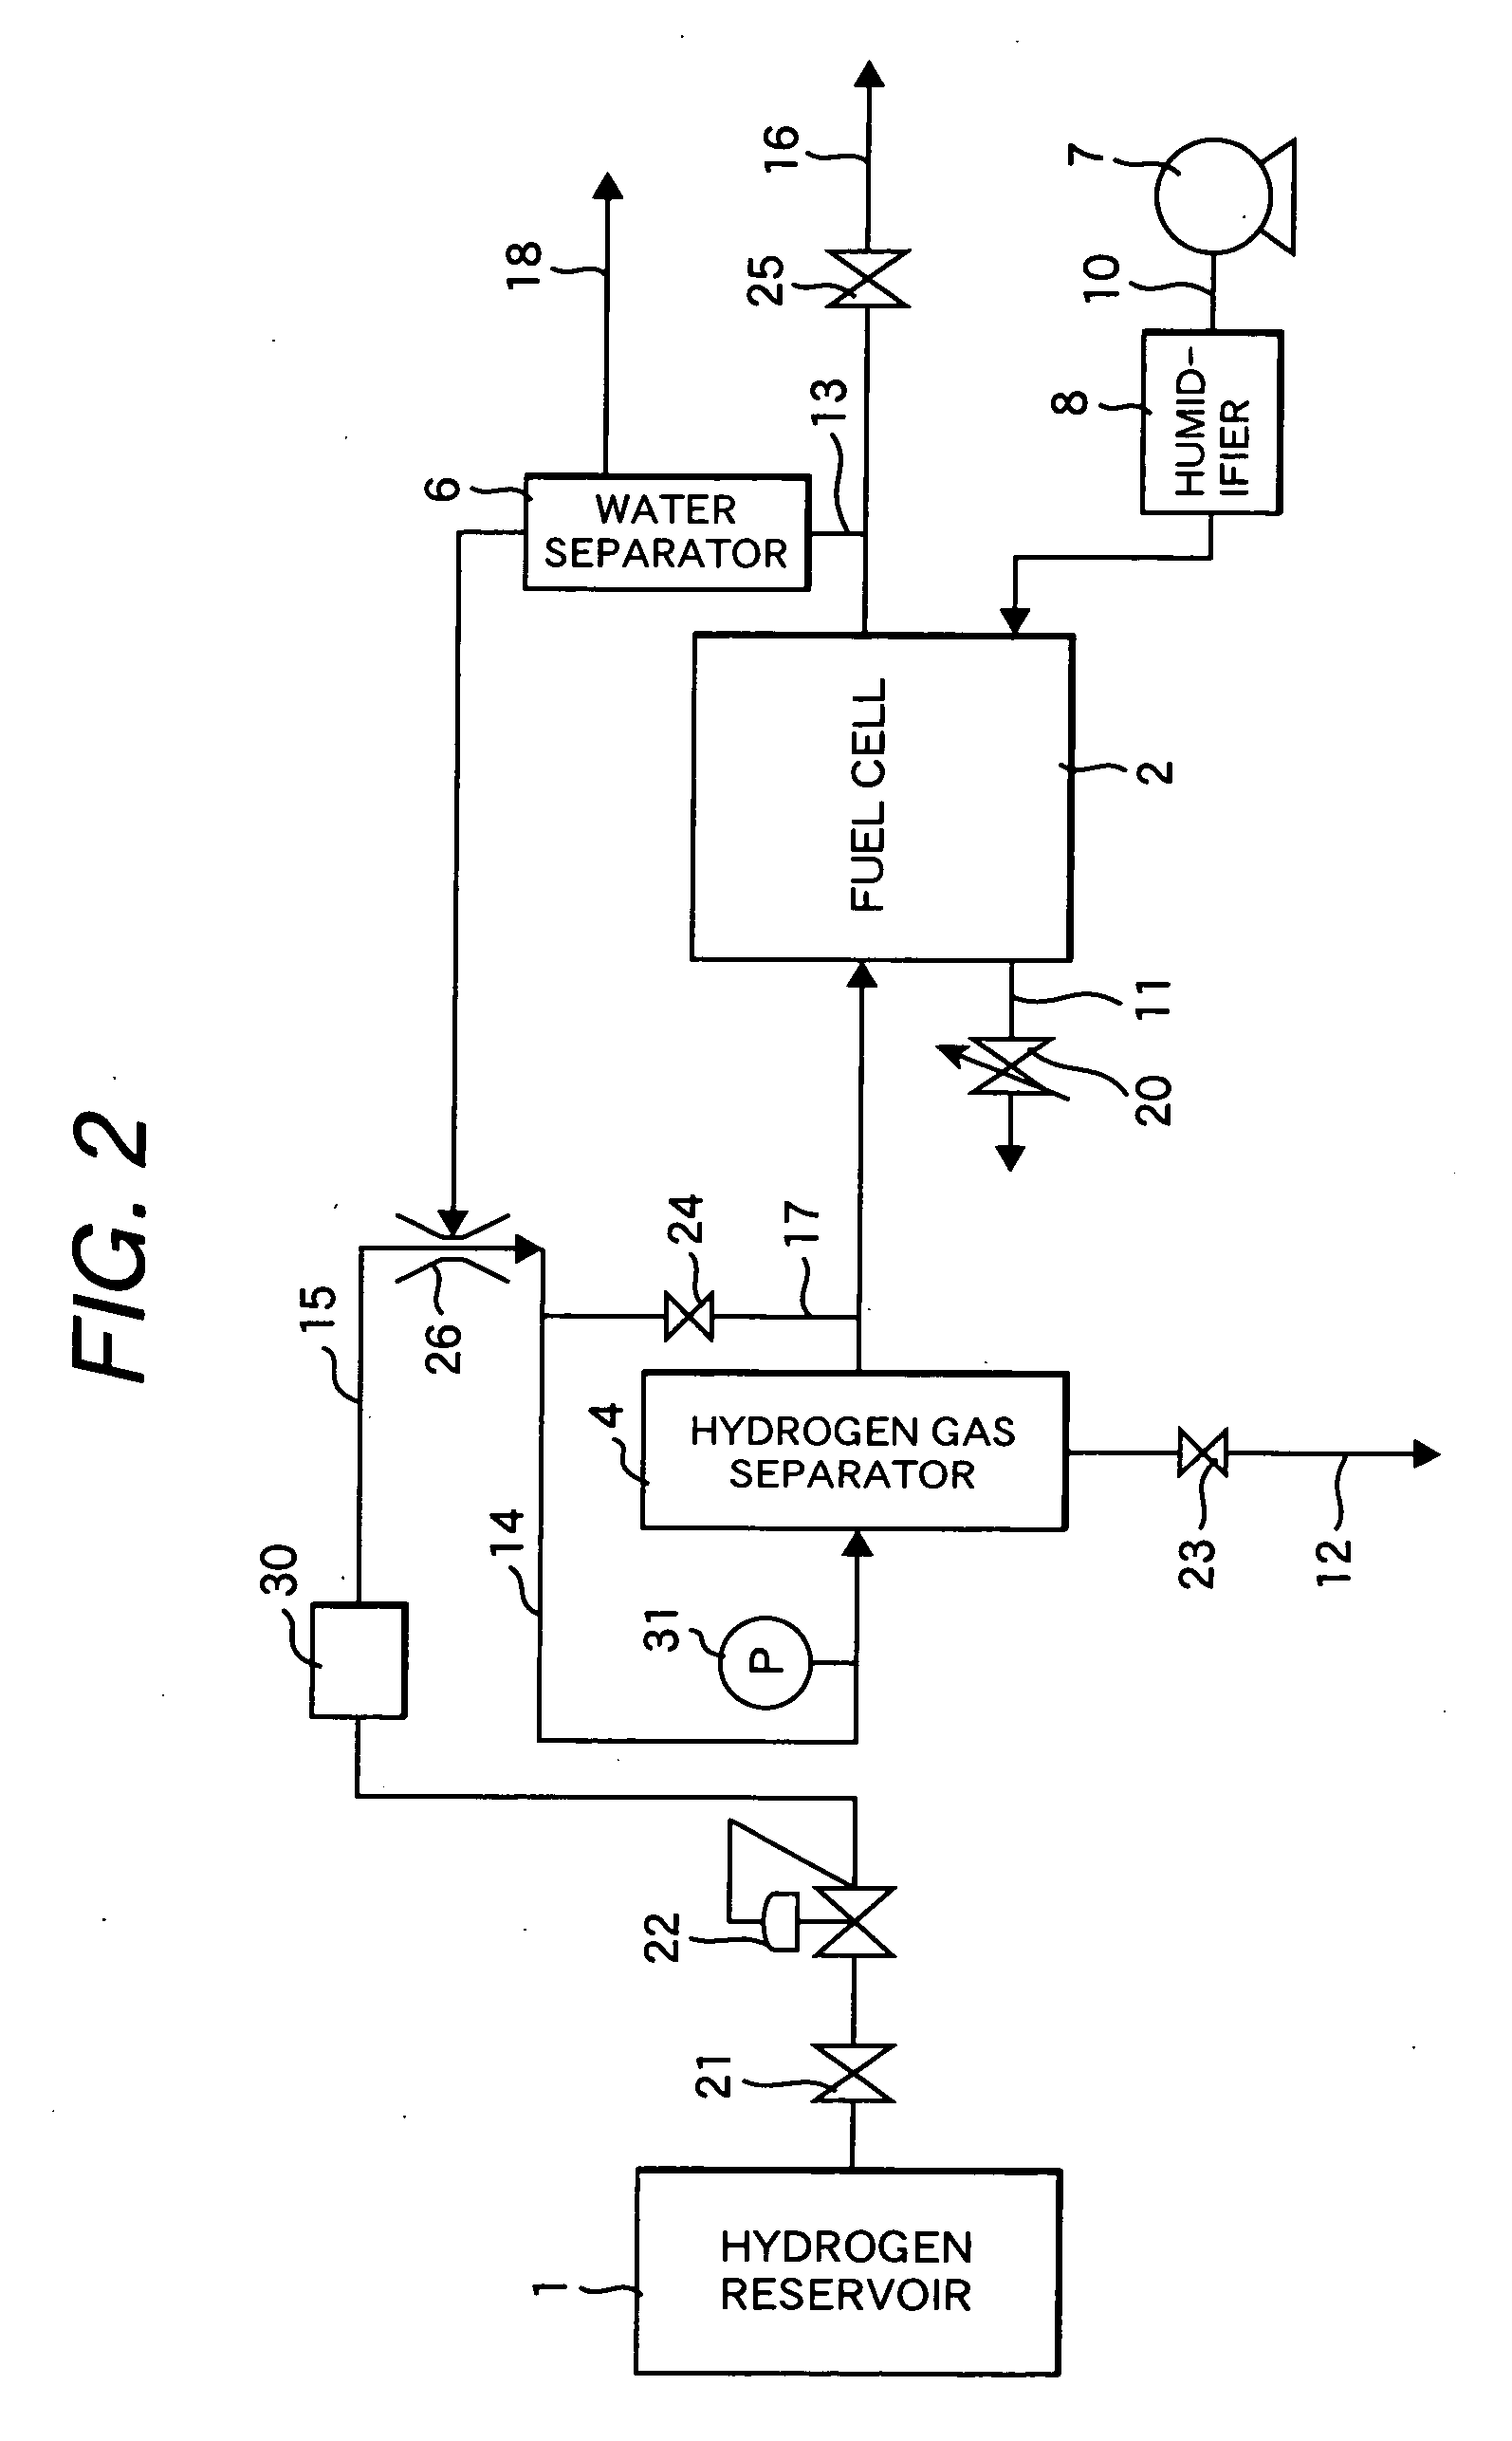 Fuel cell power generation system